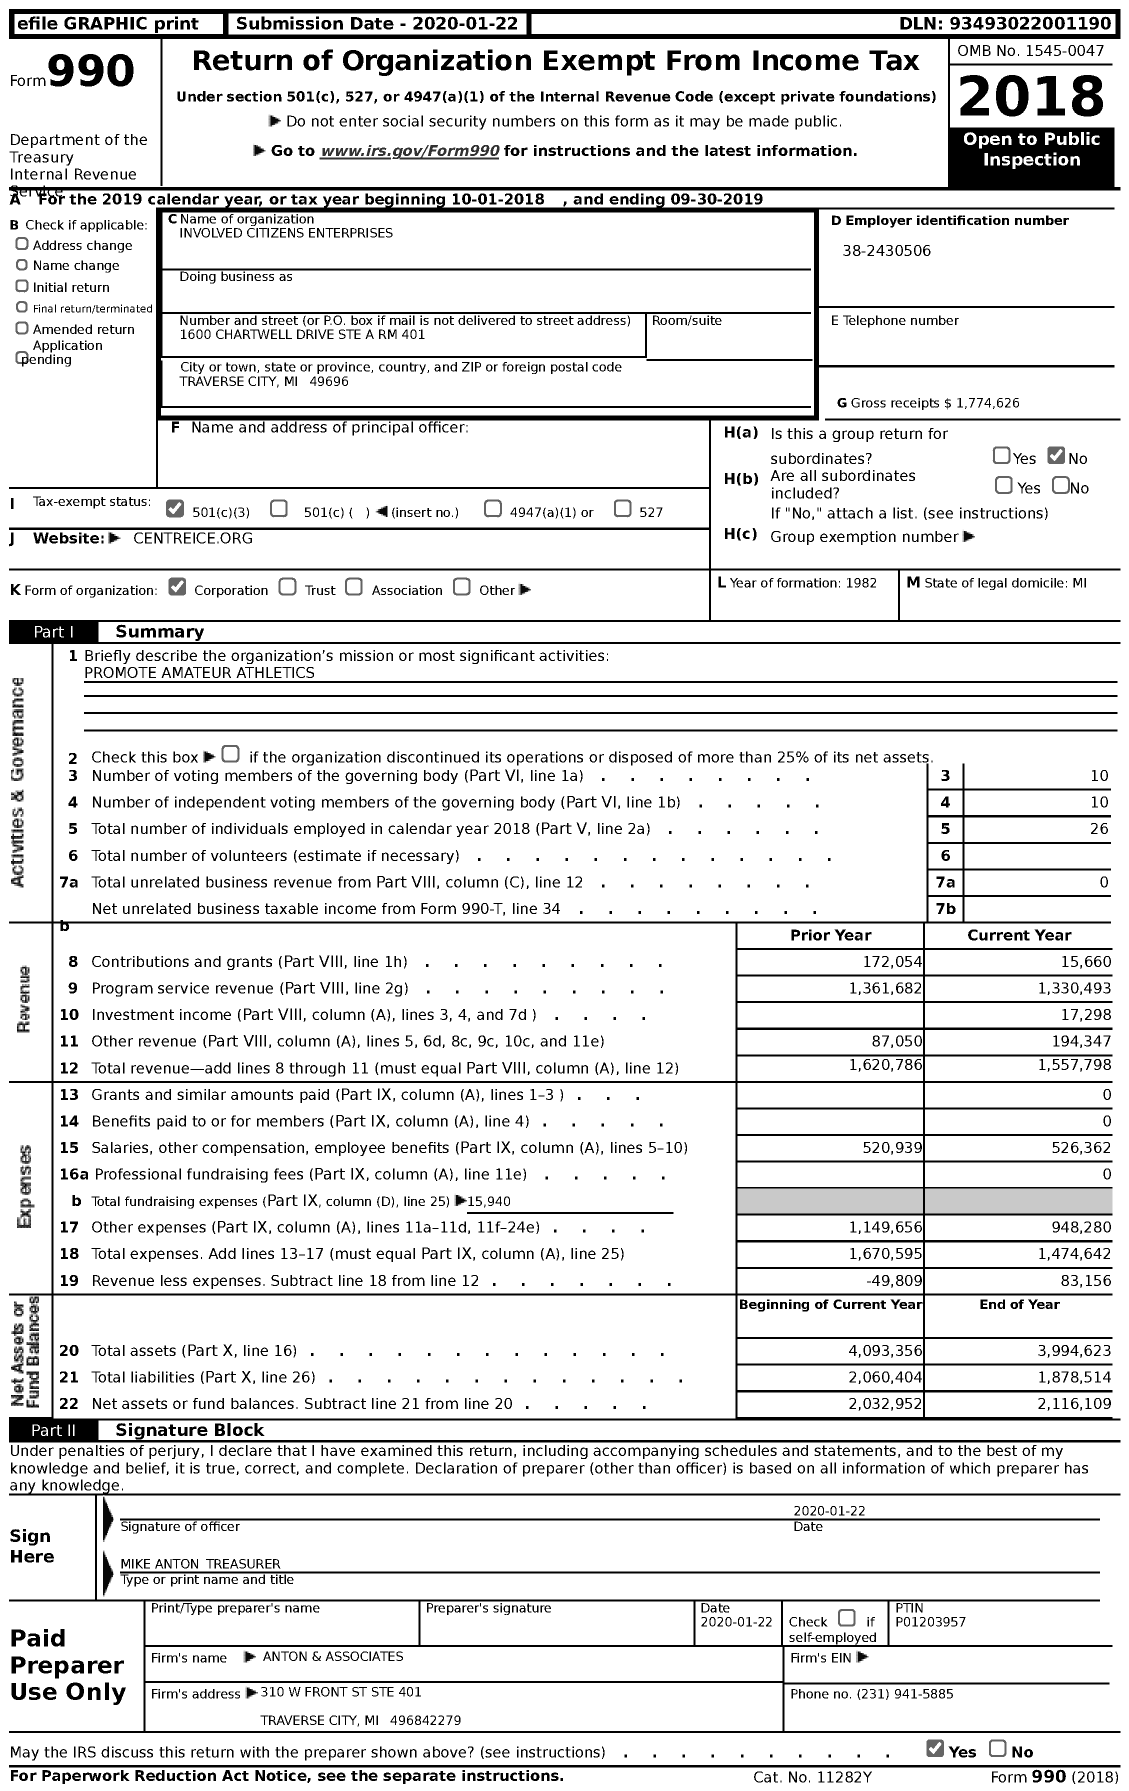 Image of first page of 2018 Form 990 for Involved Citizens Enterprises